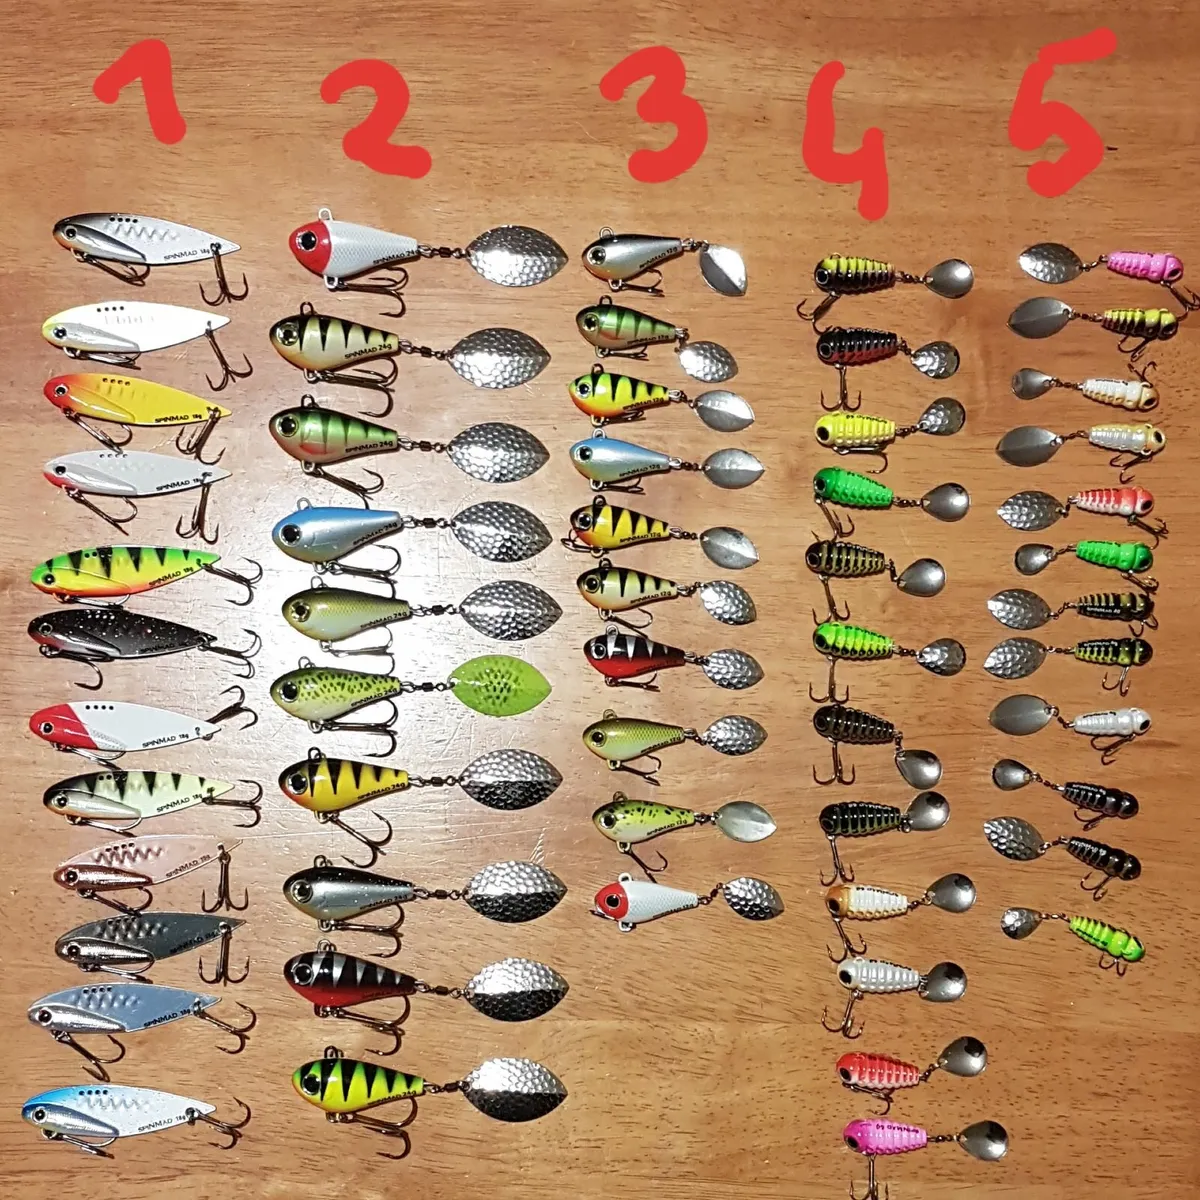 New soft and hard fishing lures...